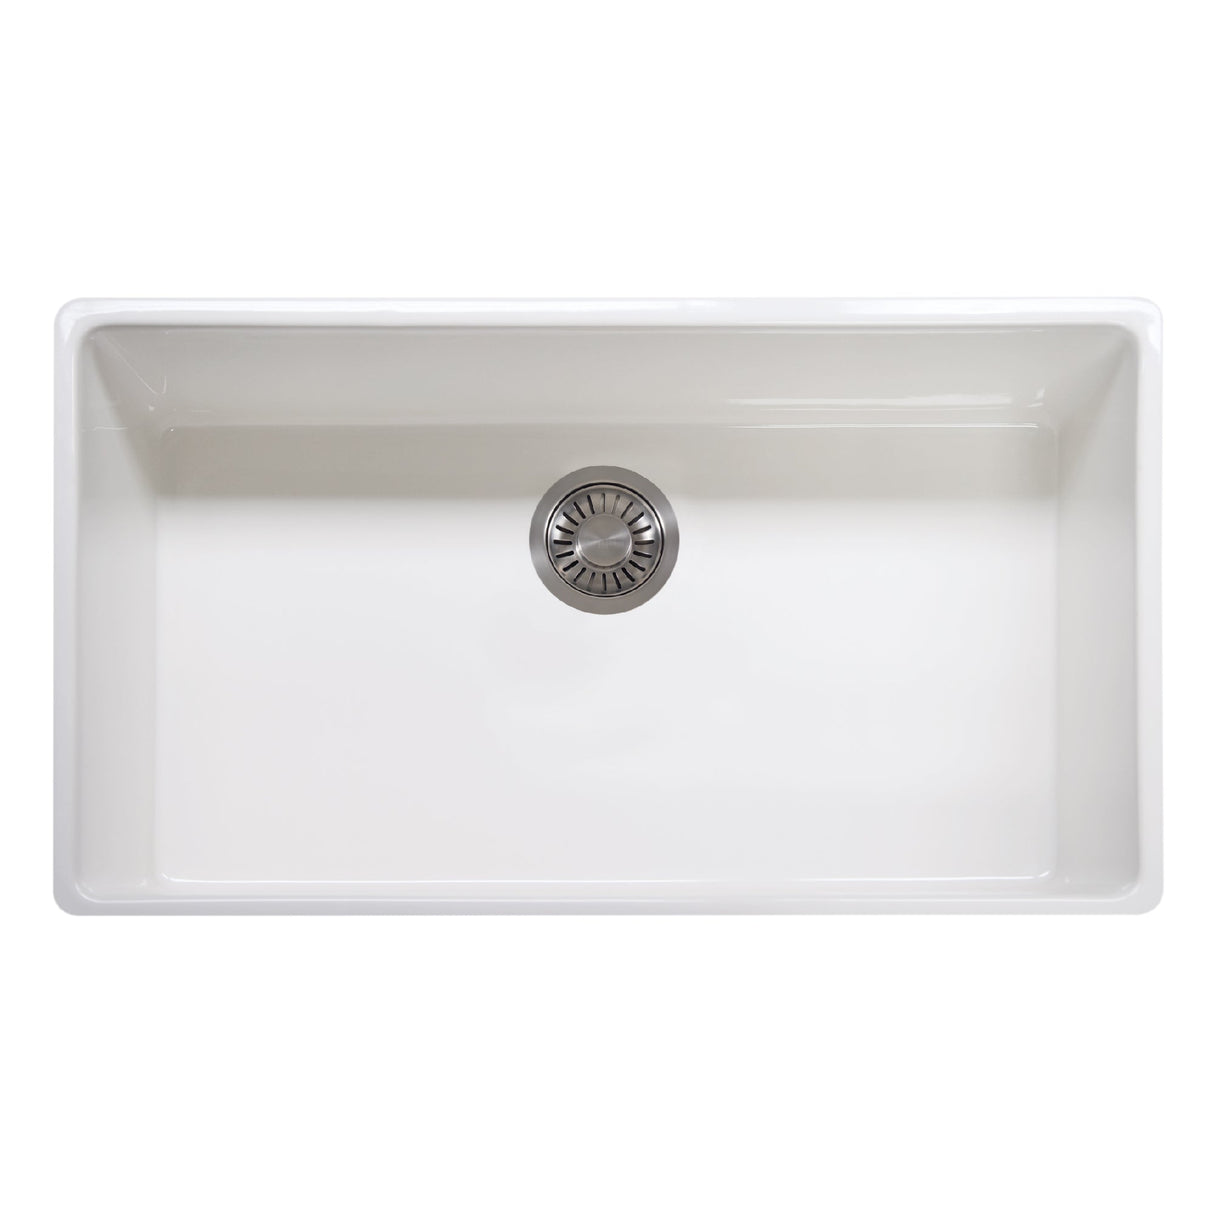 FRANKE FHK710-36WH Farm House 36-in. x 20-in. White Apron Front Single Bowl Fireclay Kitchen Sink - FHK710-36WH In White